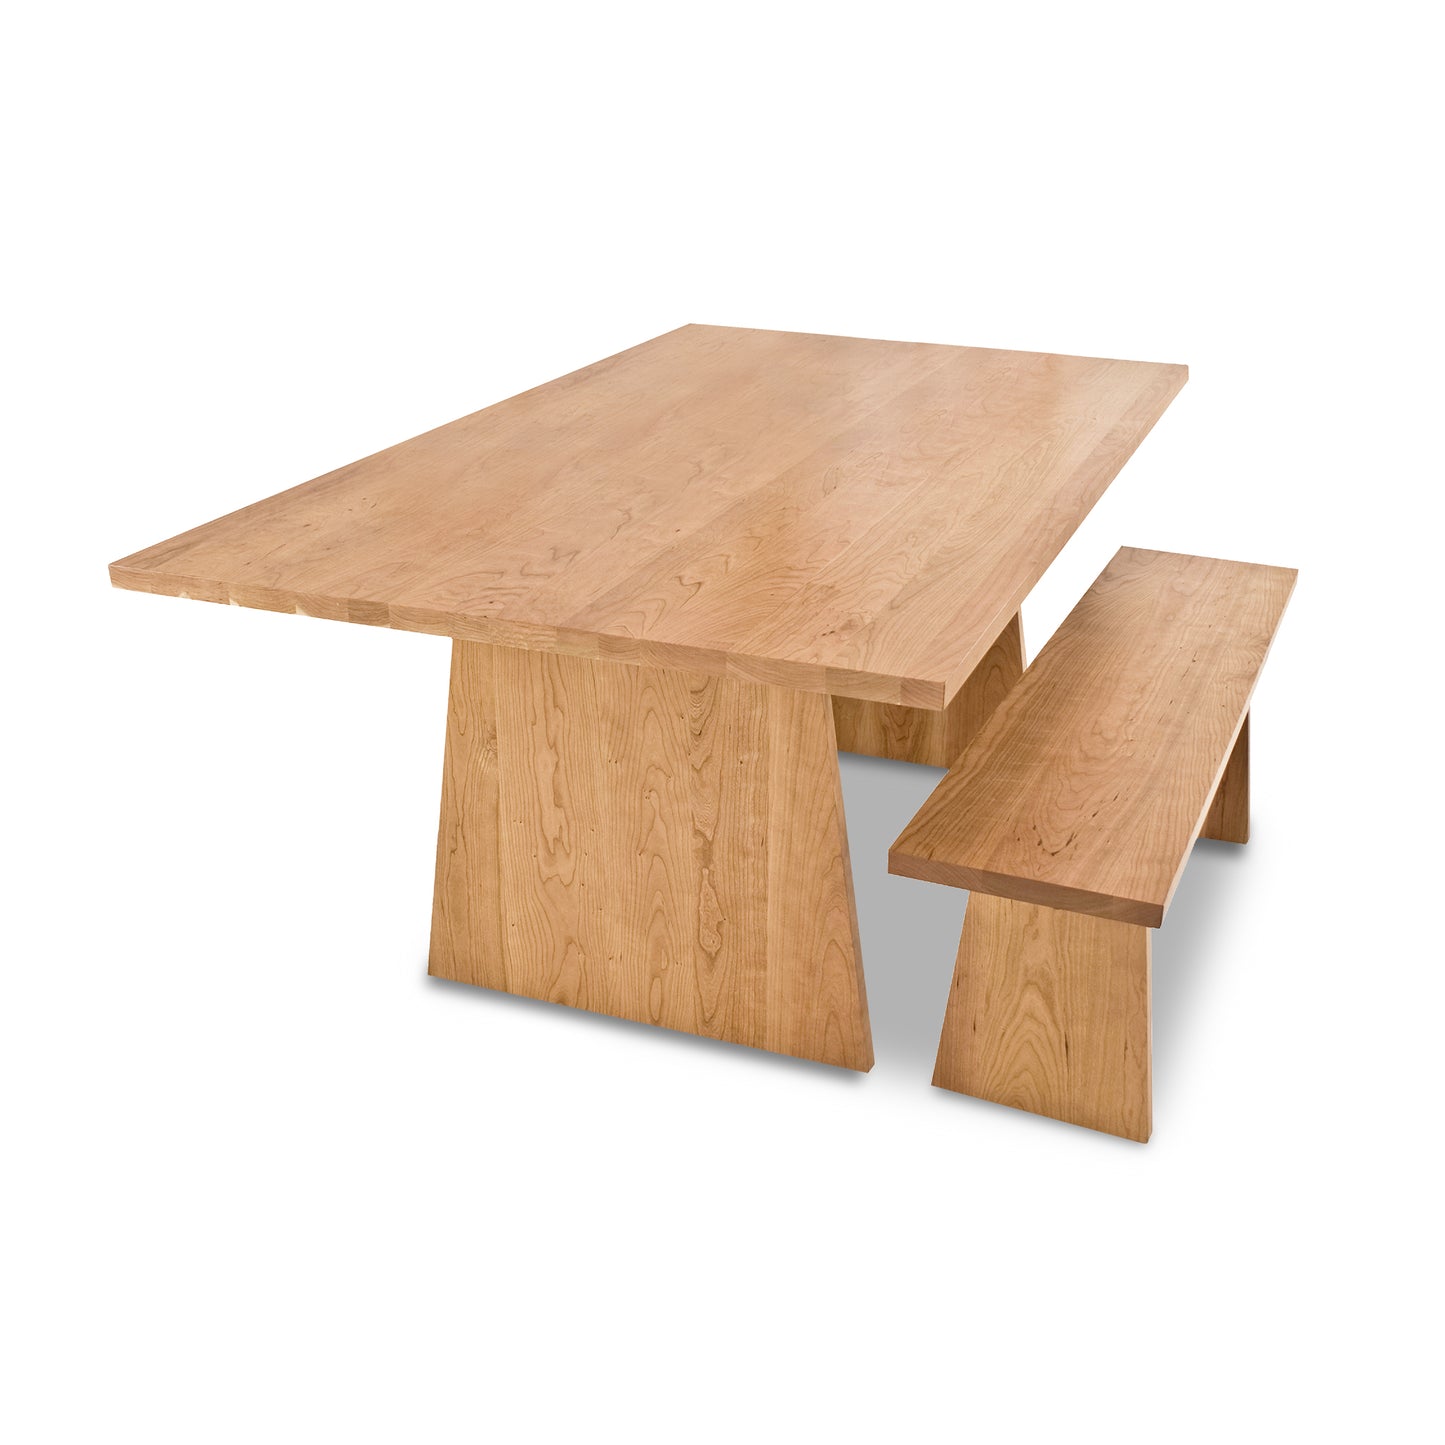 An eco-friendly Lyndon Furniture Modern Designer Solid Top Table and bench on a white background.